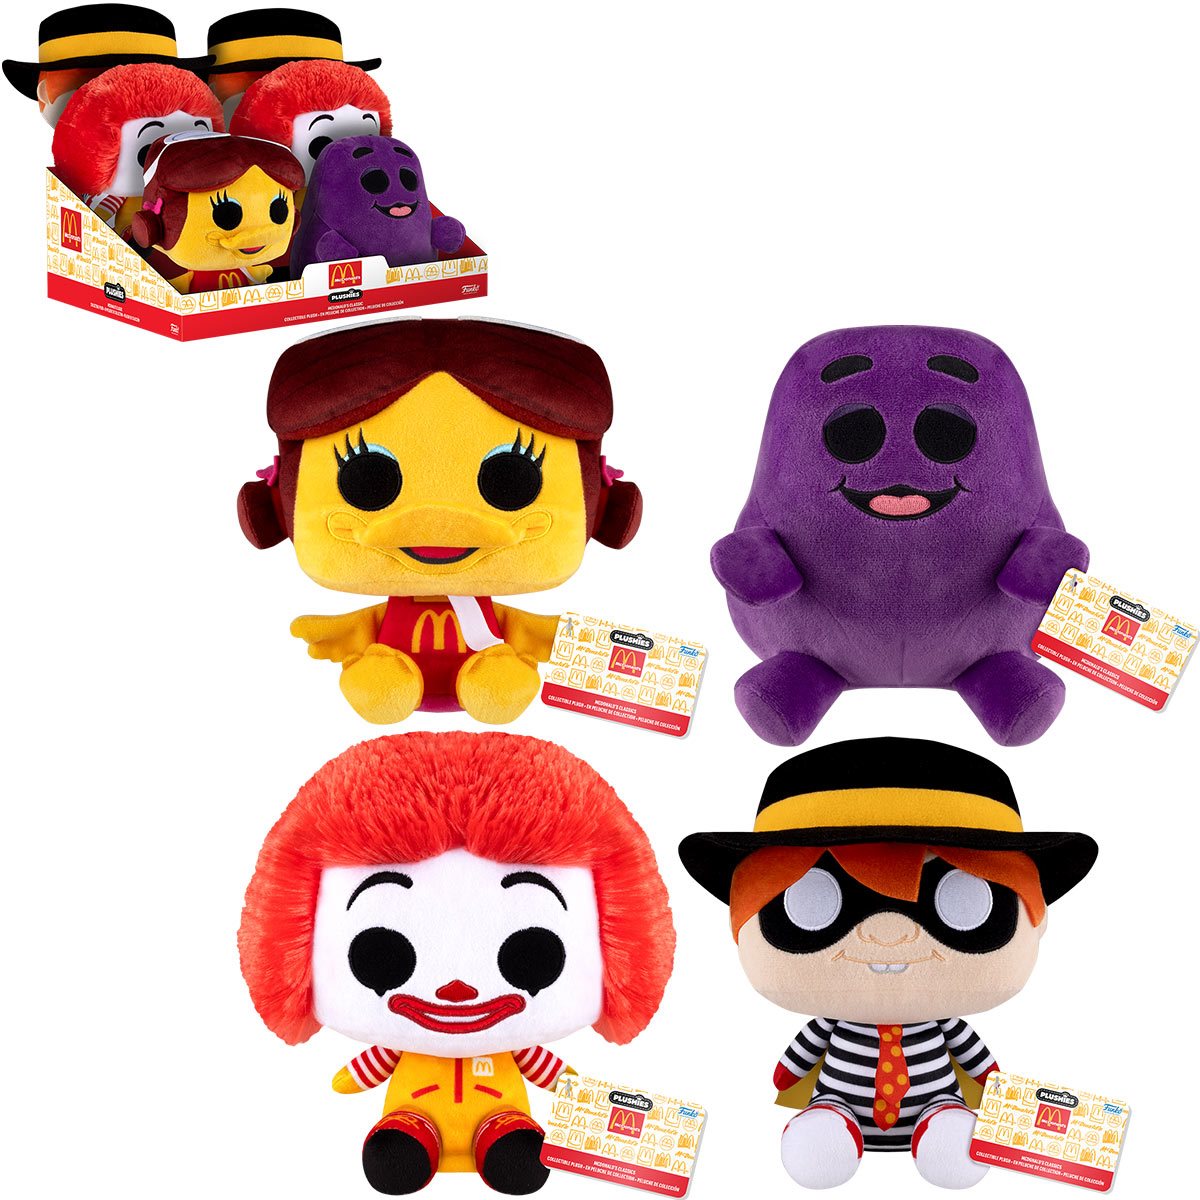 Funko's New McDonald's Pop Figures Include McNuggets With Careers